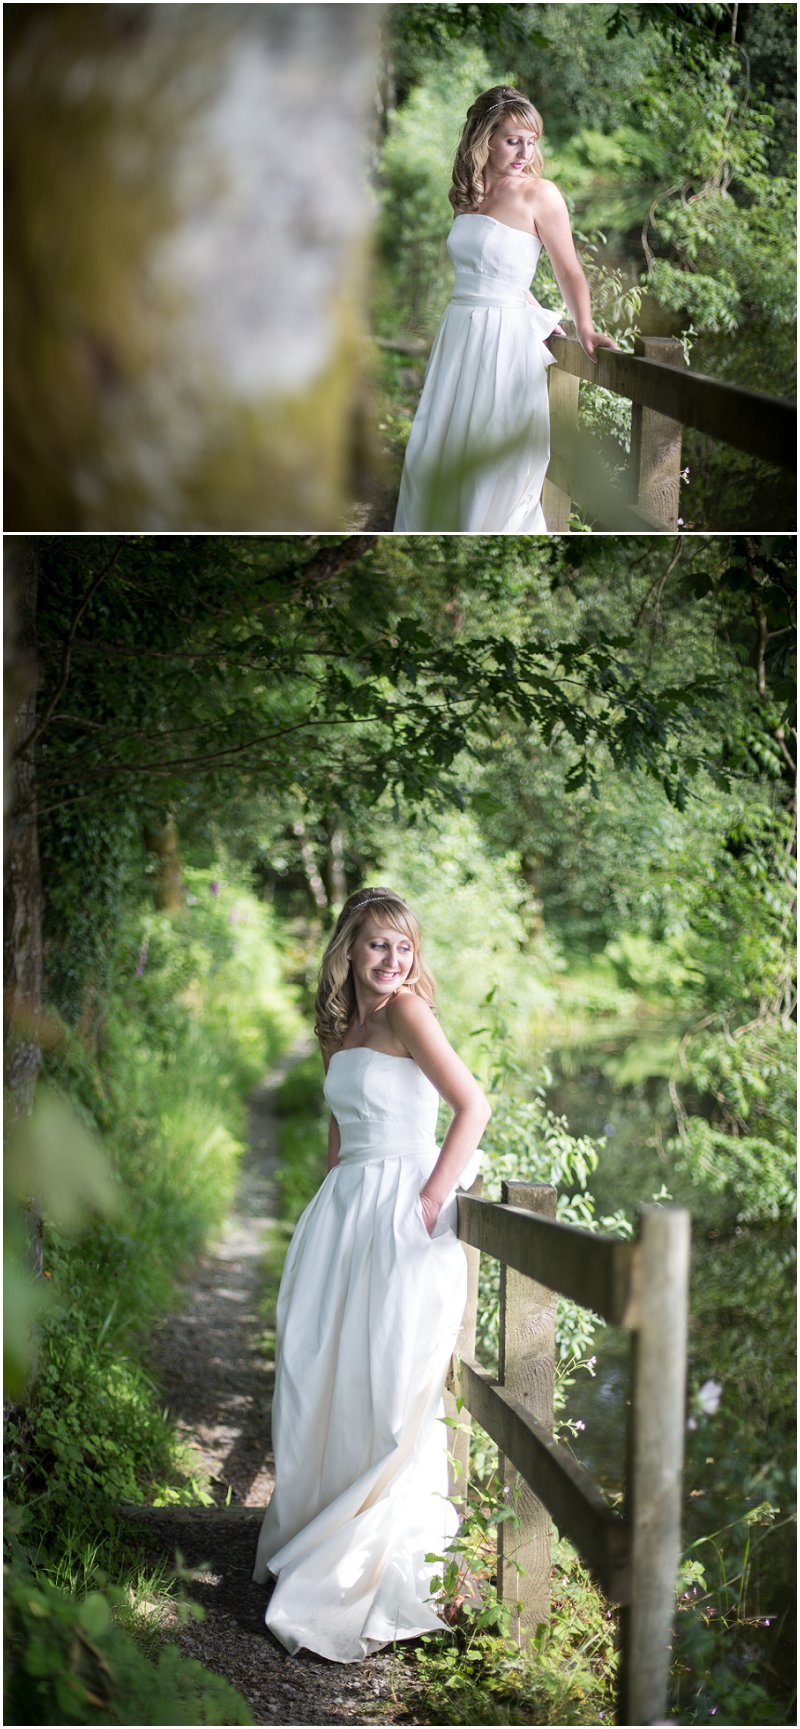 Stunning bride in the grounds of Linthwaite House Wedding Photographer